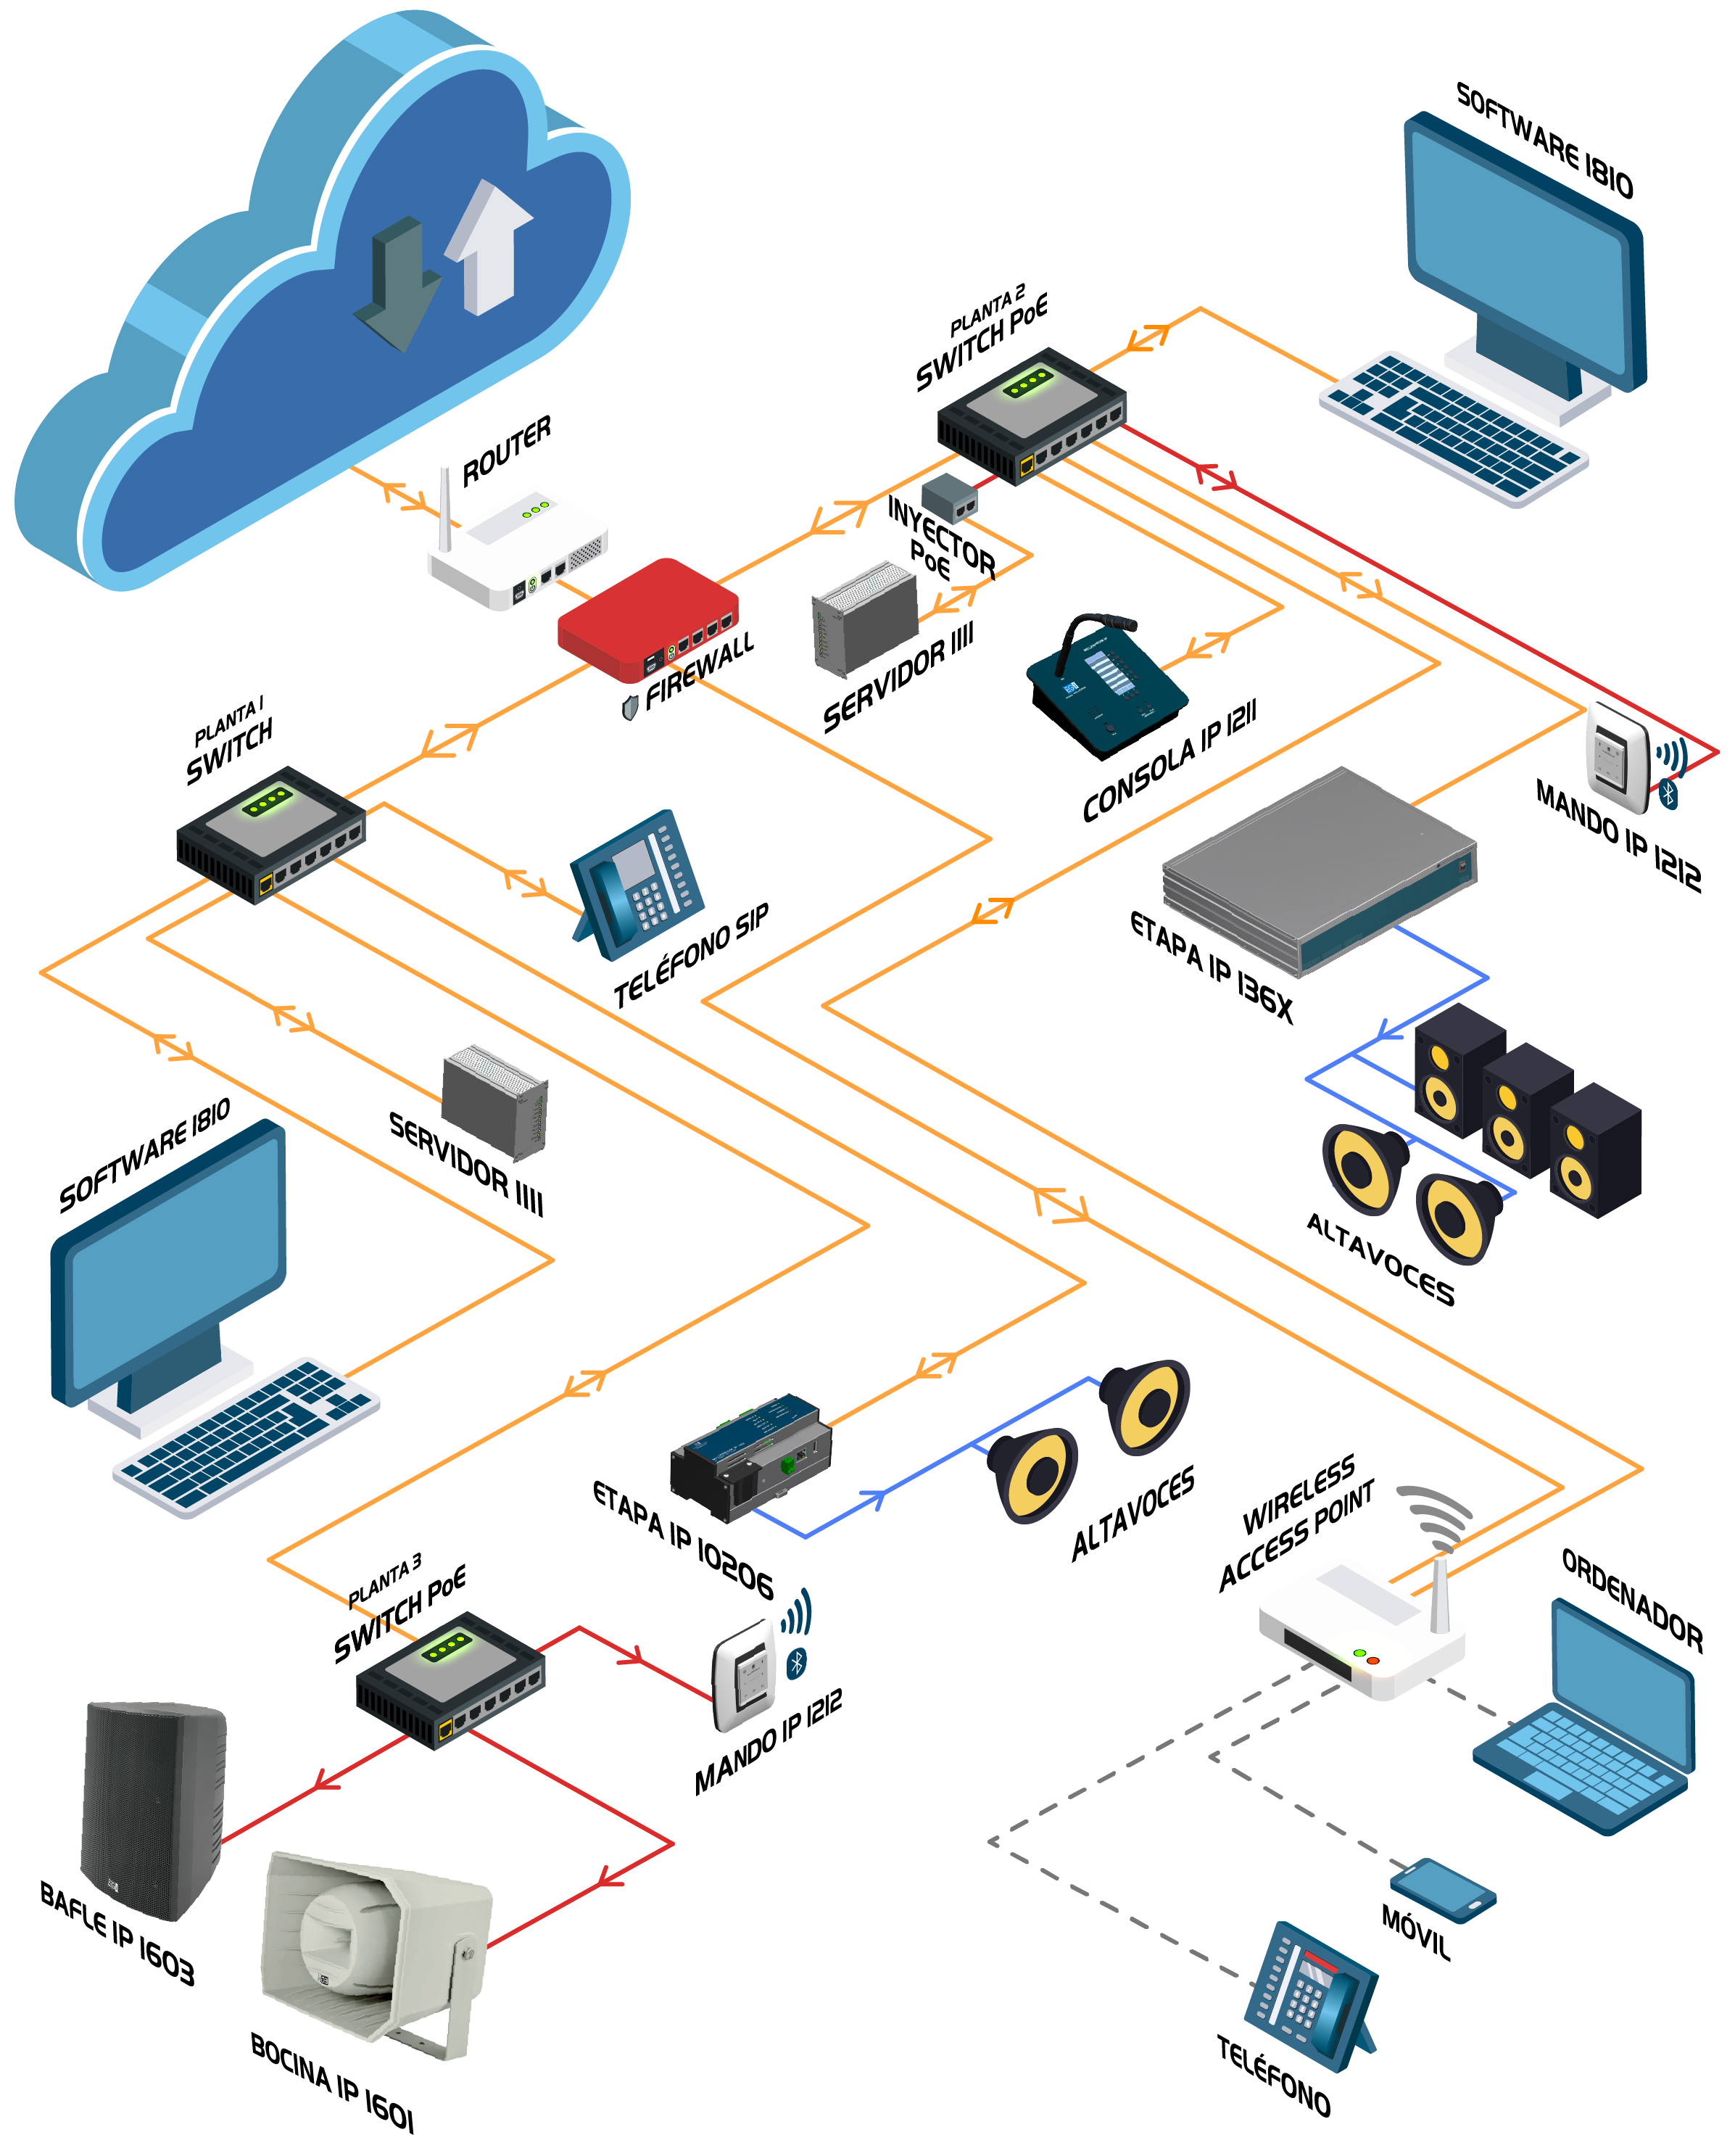 Architecture of the IP system